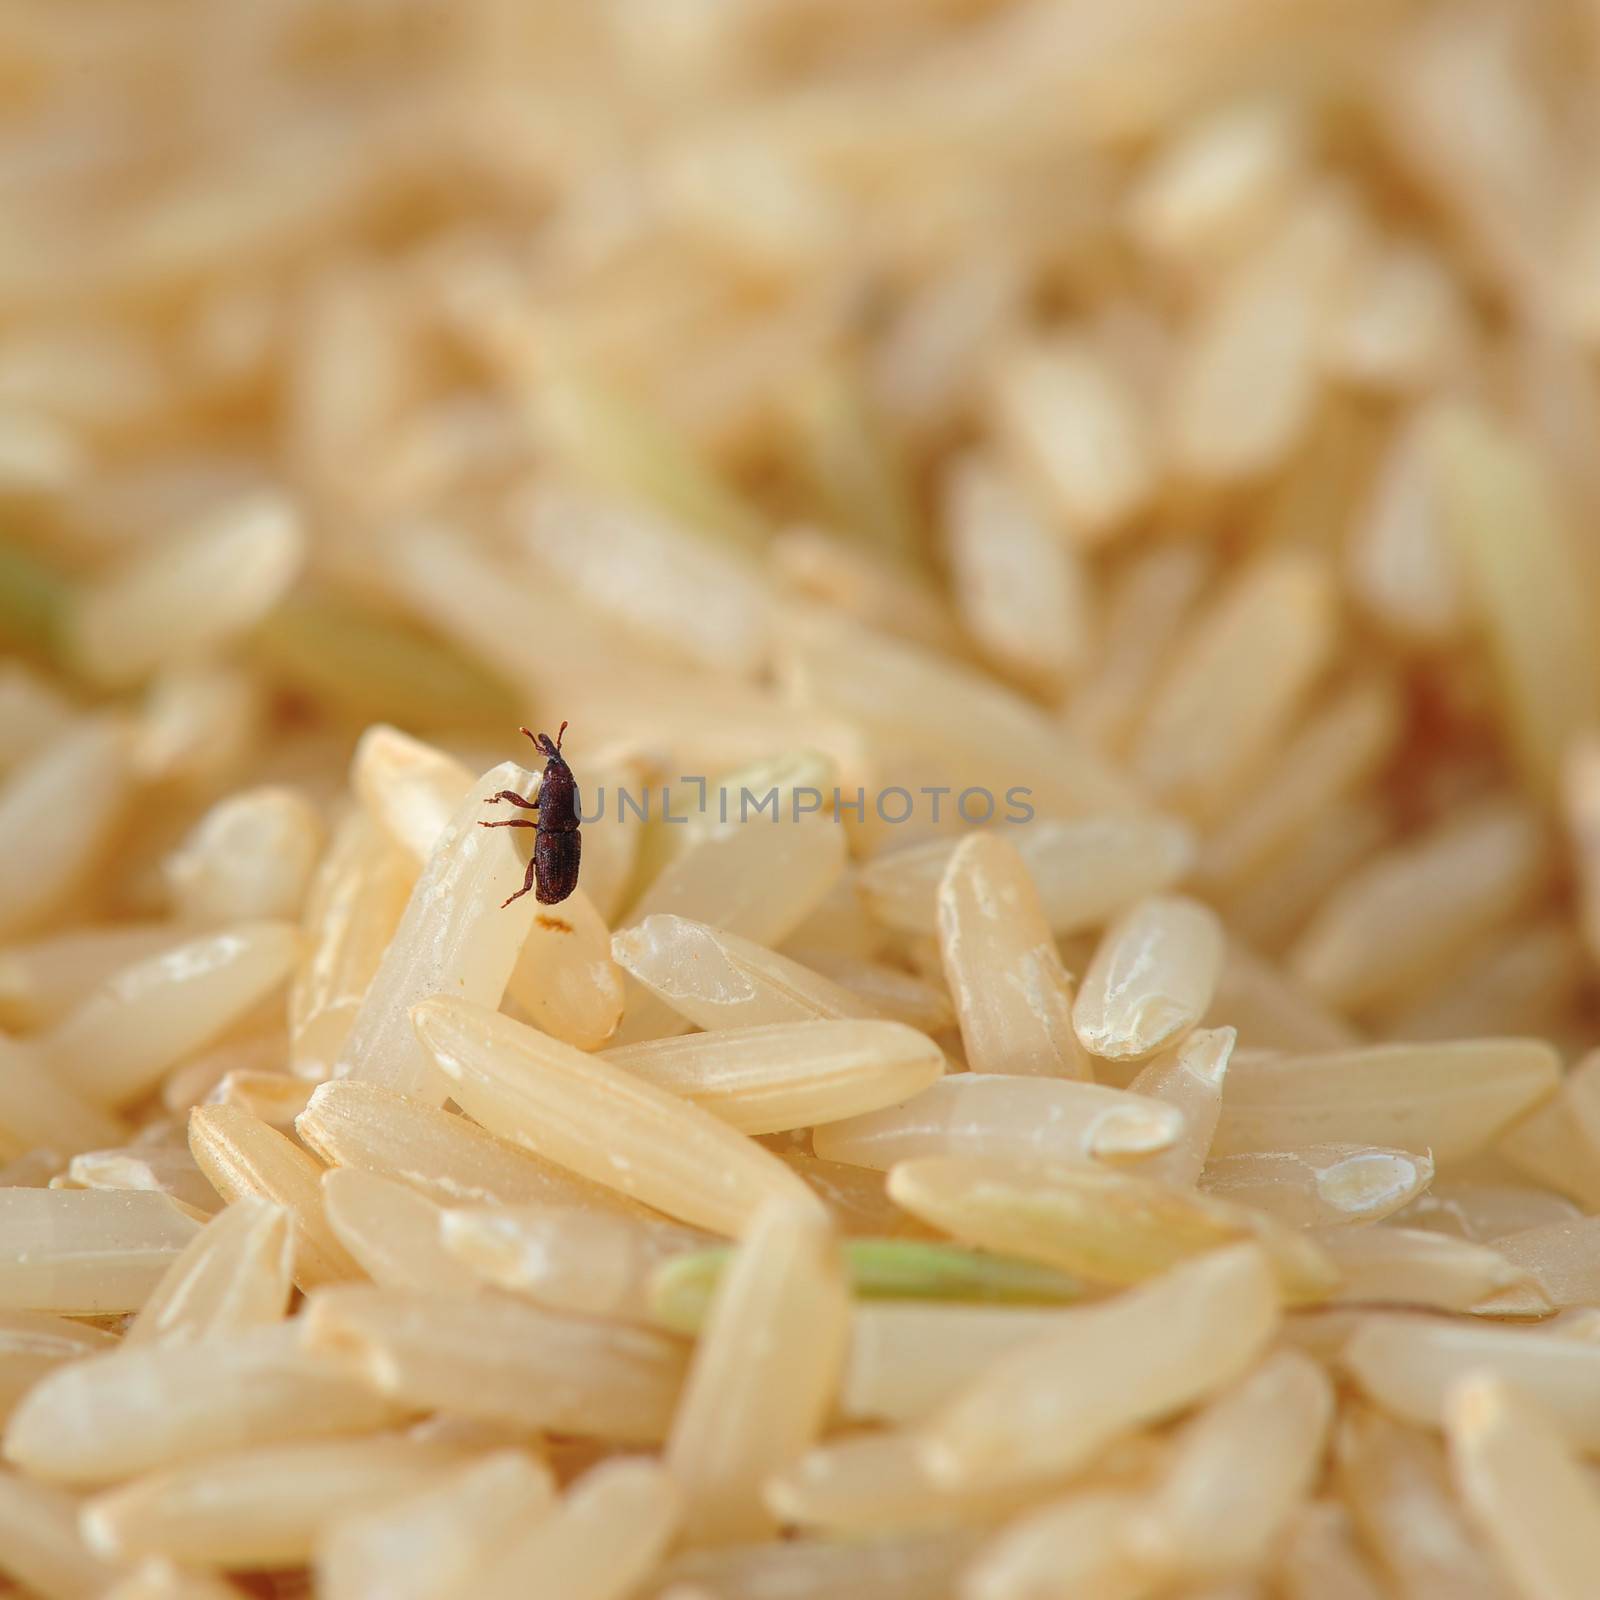 weevil in rice by antpkr